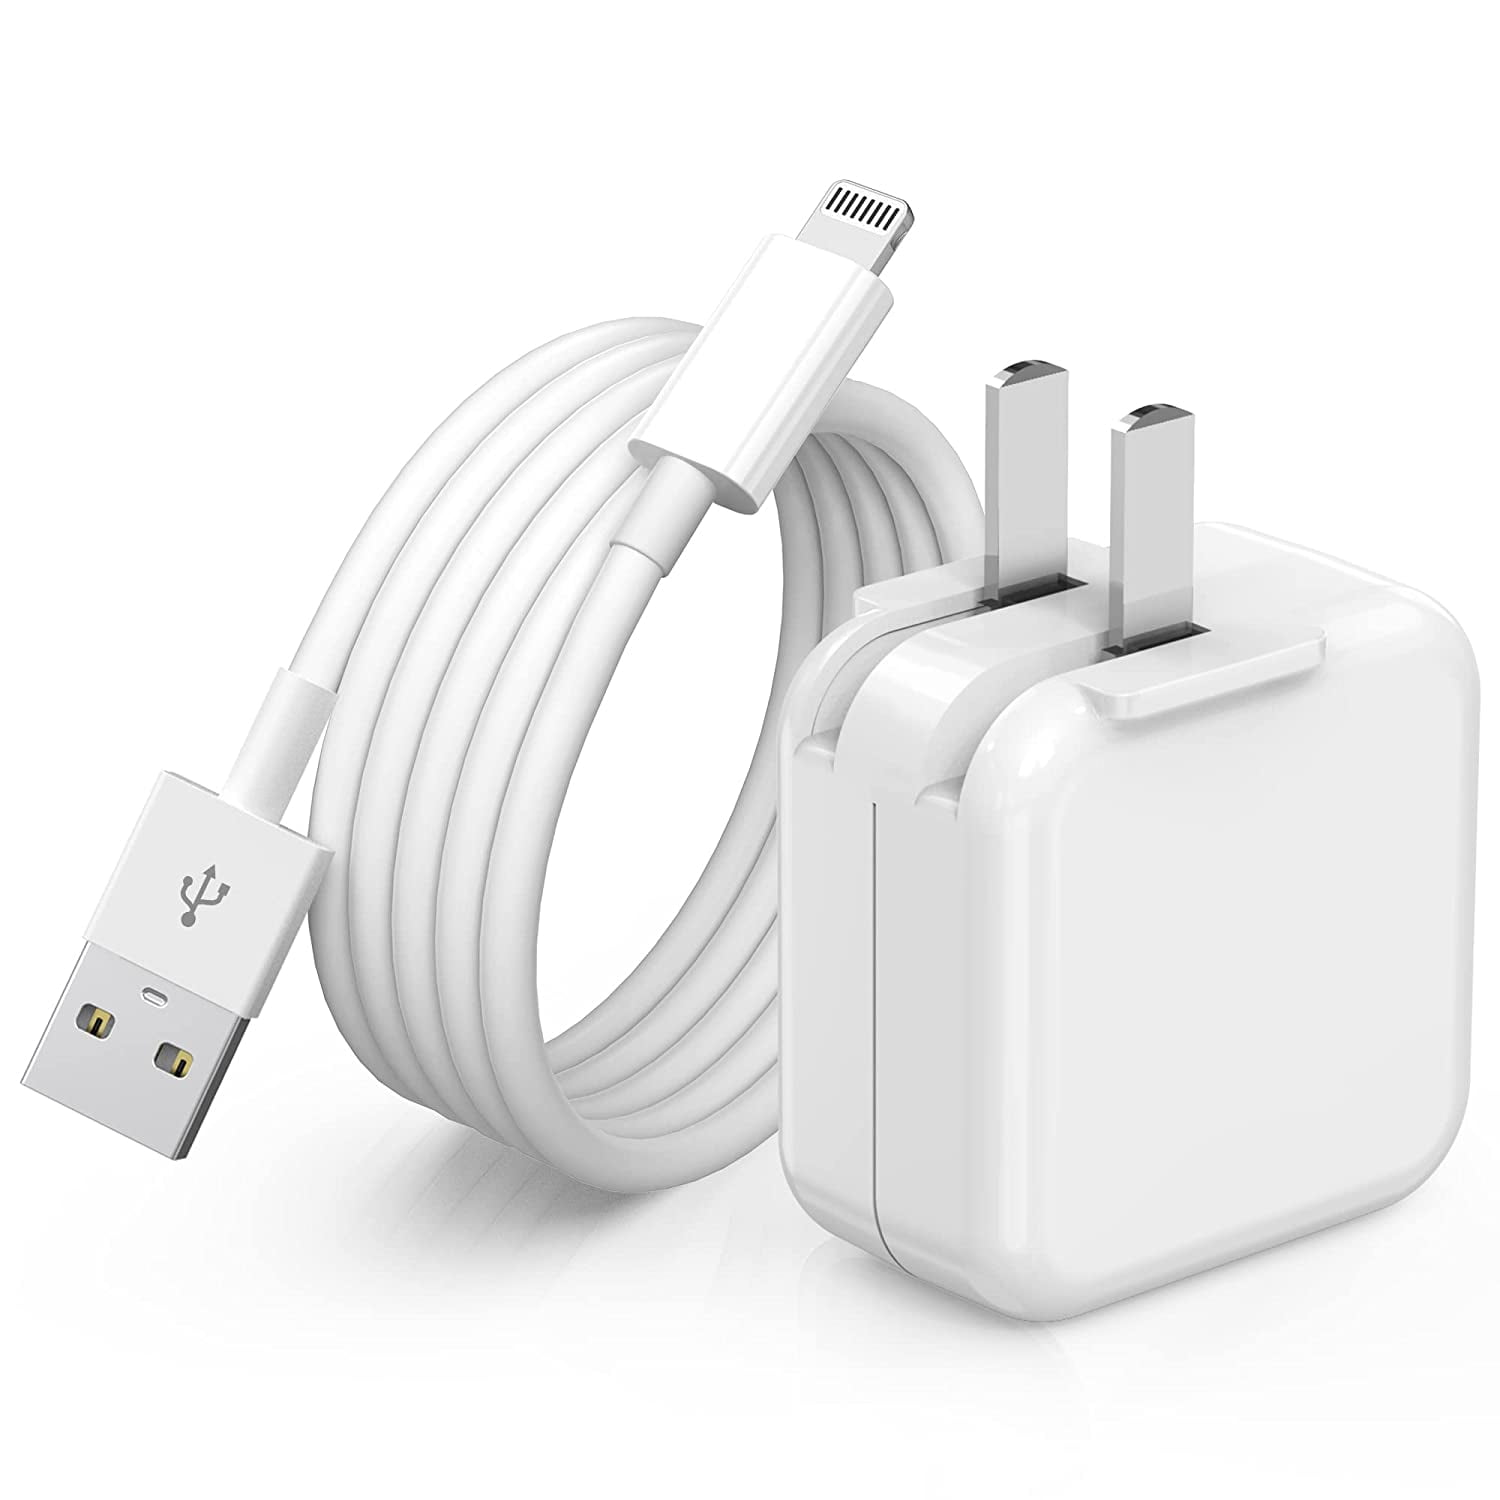 iPad Charger iPhone Charger [Apple MFi Certified] 12W USB Wall Foldable  Travel Plug w/ USB Charging Cable Compatible with iPhone, iPad, iPad Mini,  iPad Air 1/2/3, Airpod 